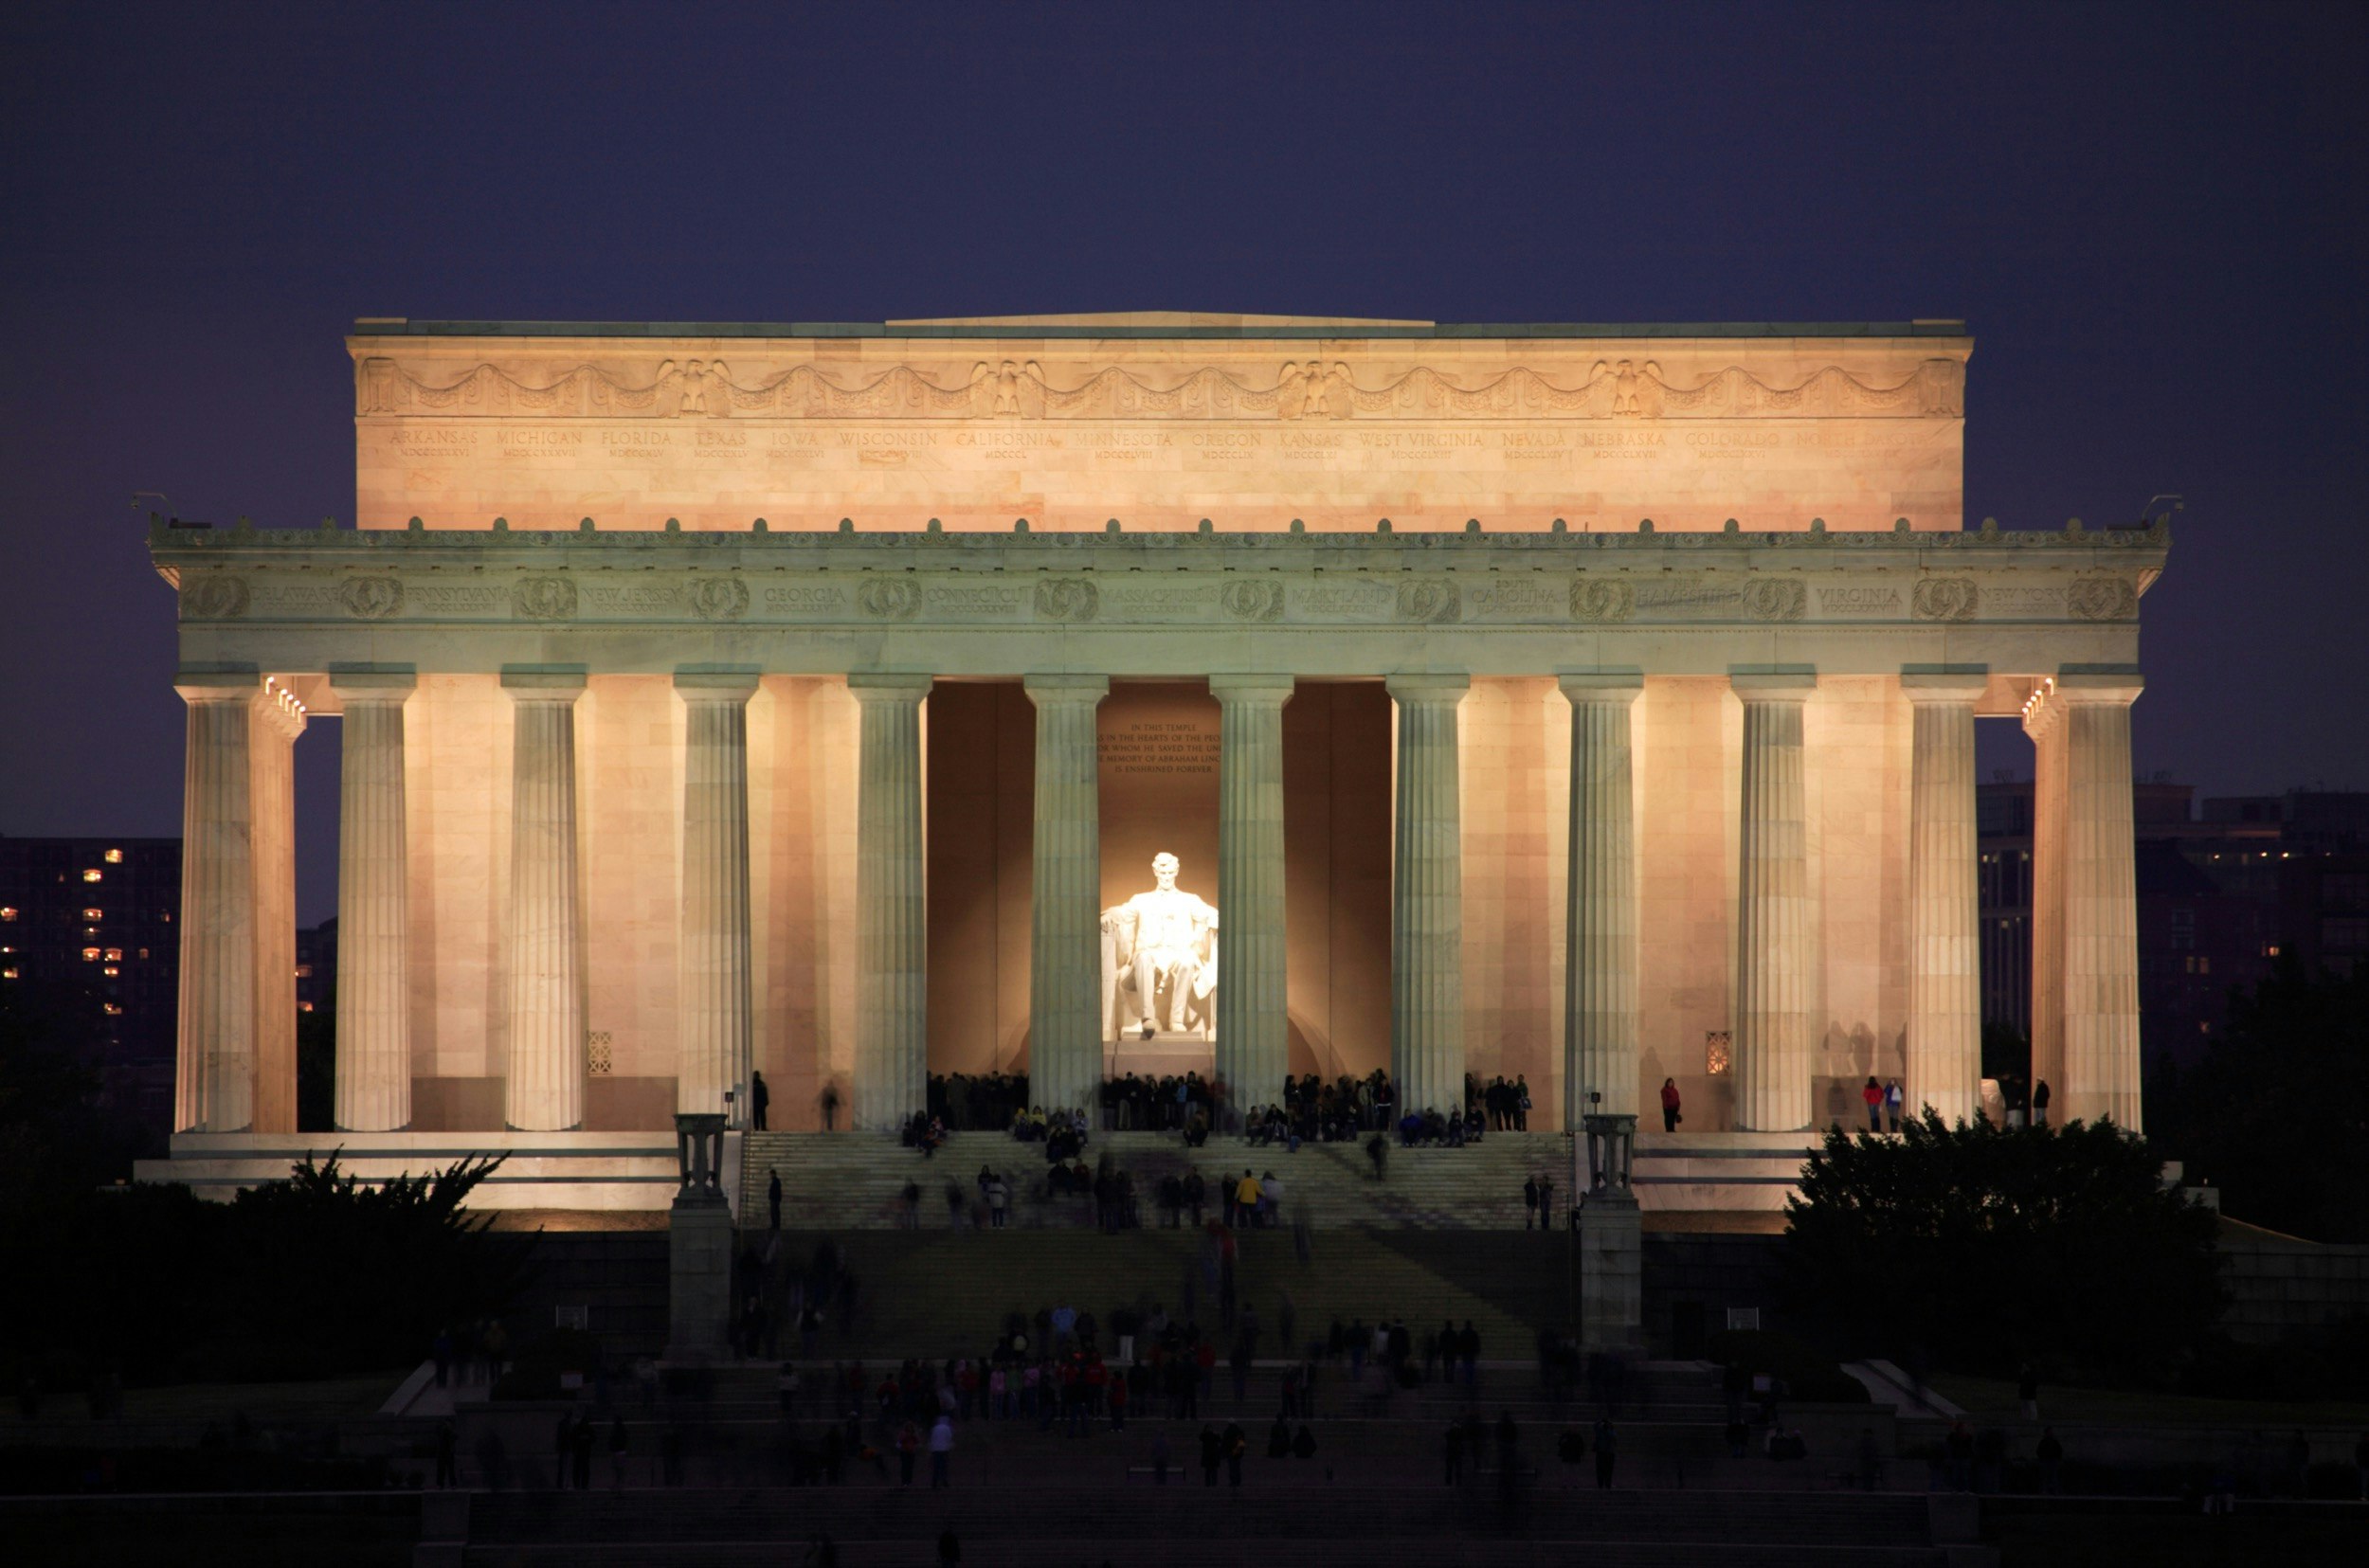 The statue of Abraham Lincoln is illuminated inside the Lincoln Memorial temple at night; Best American architecture